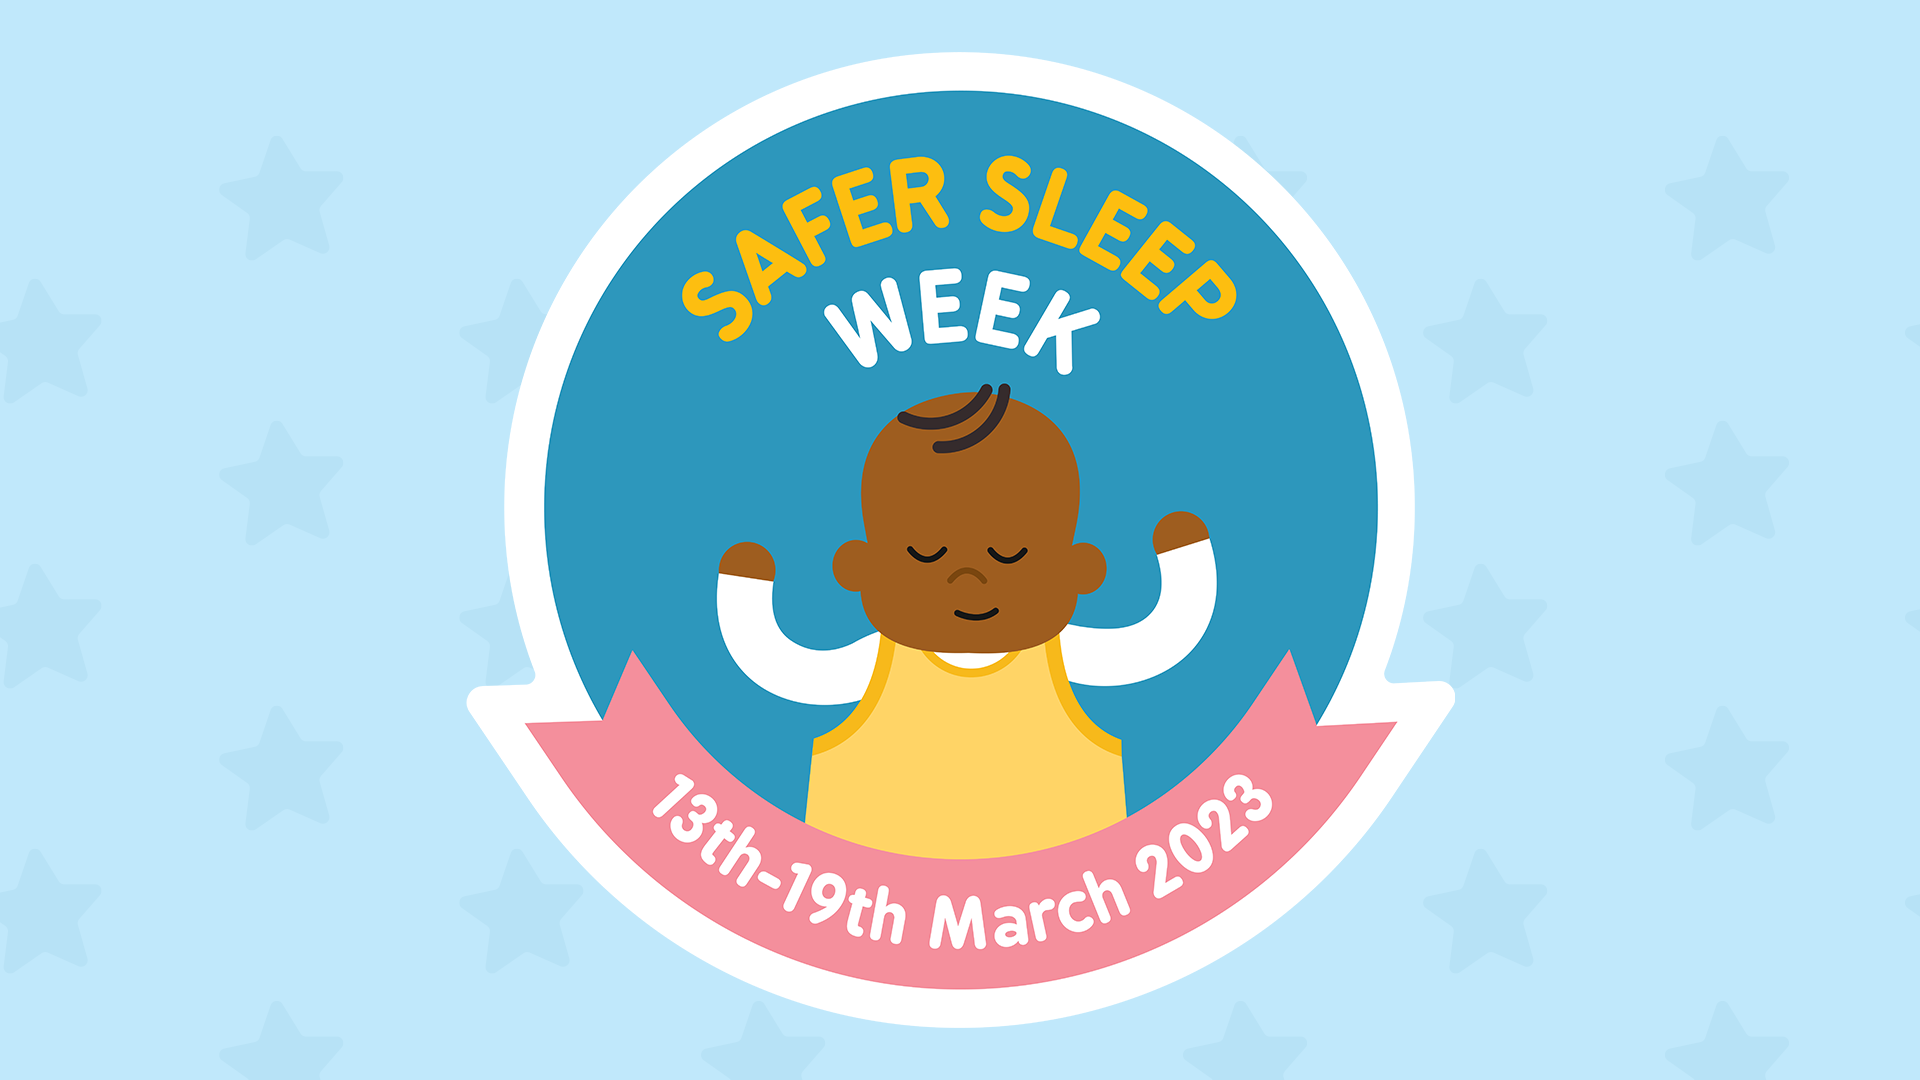 Get involved with Safer Sleep Week The Lullaby Trust